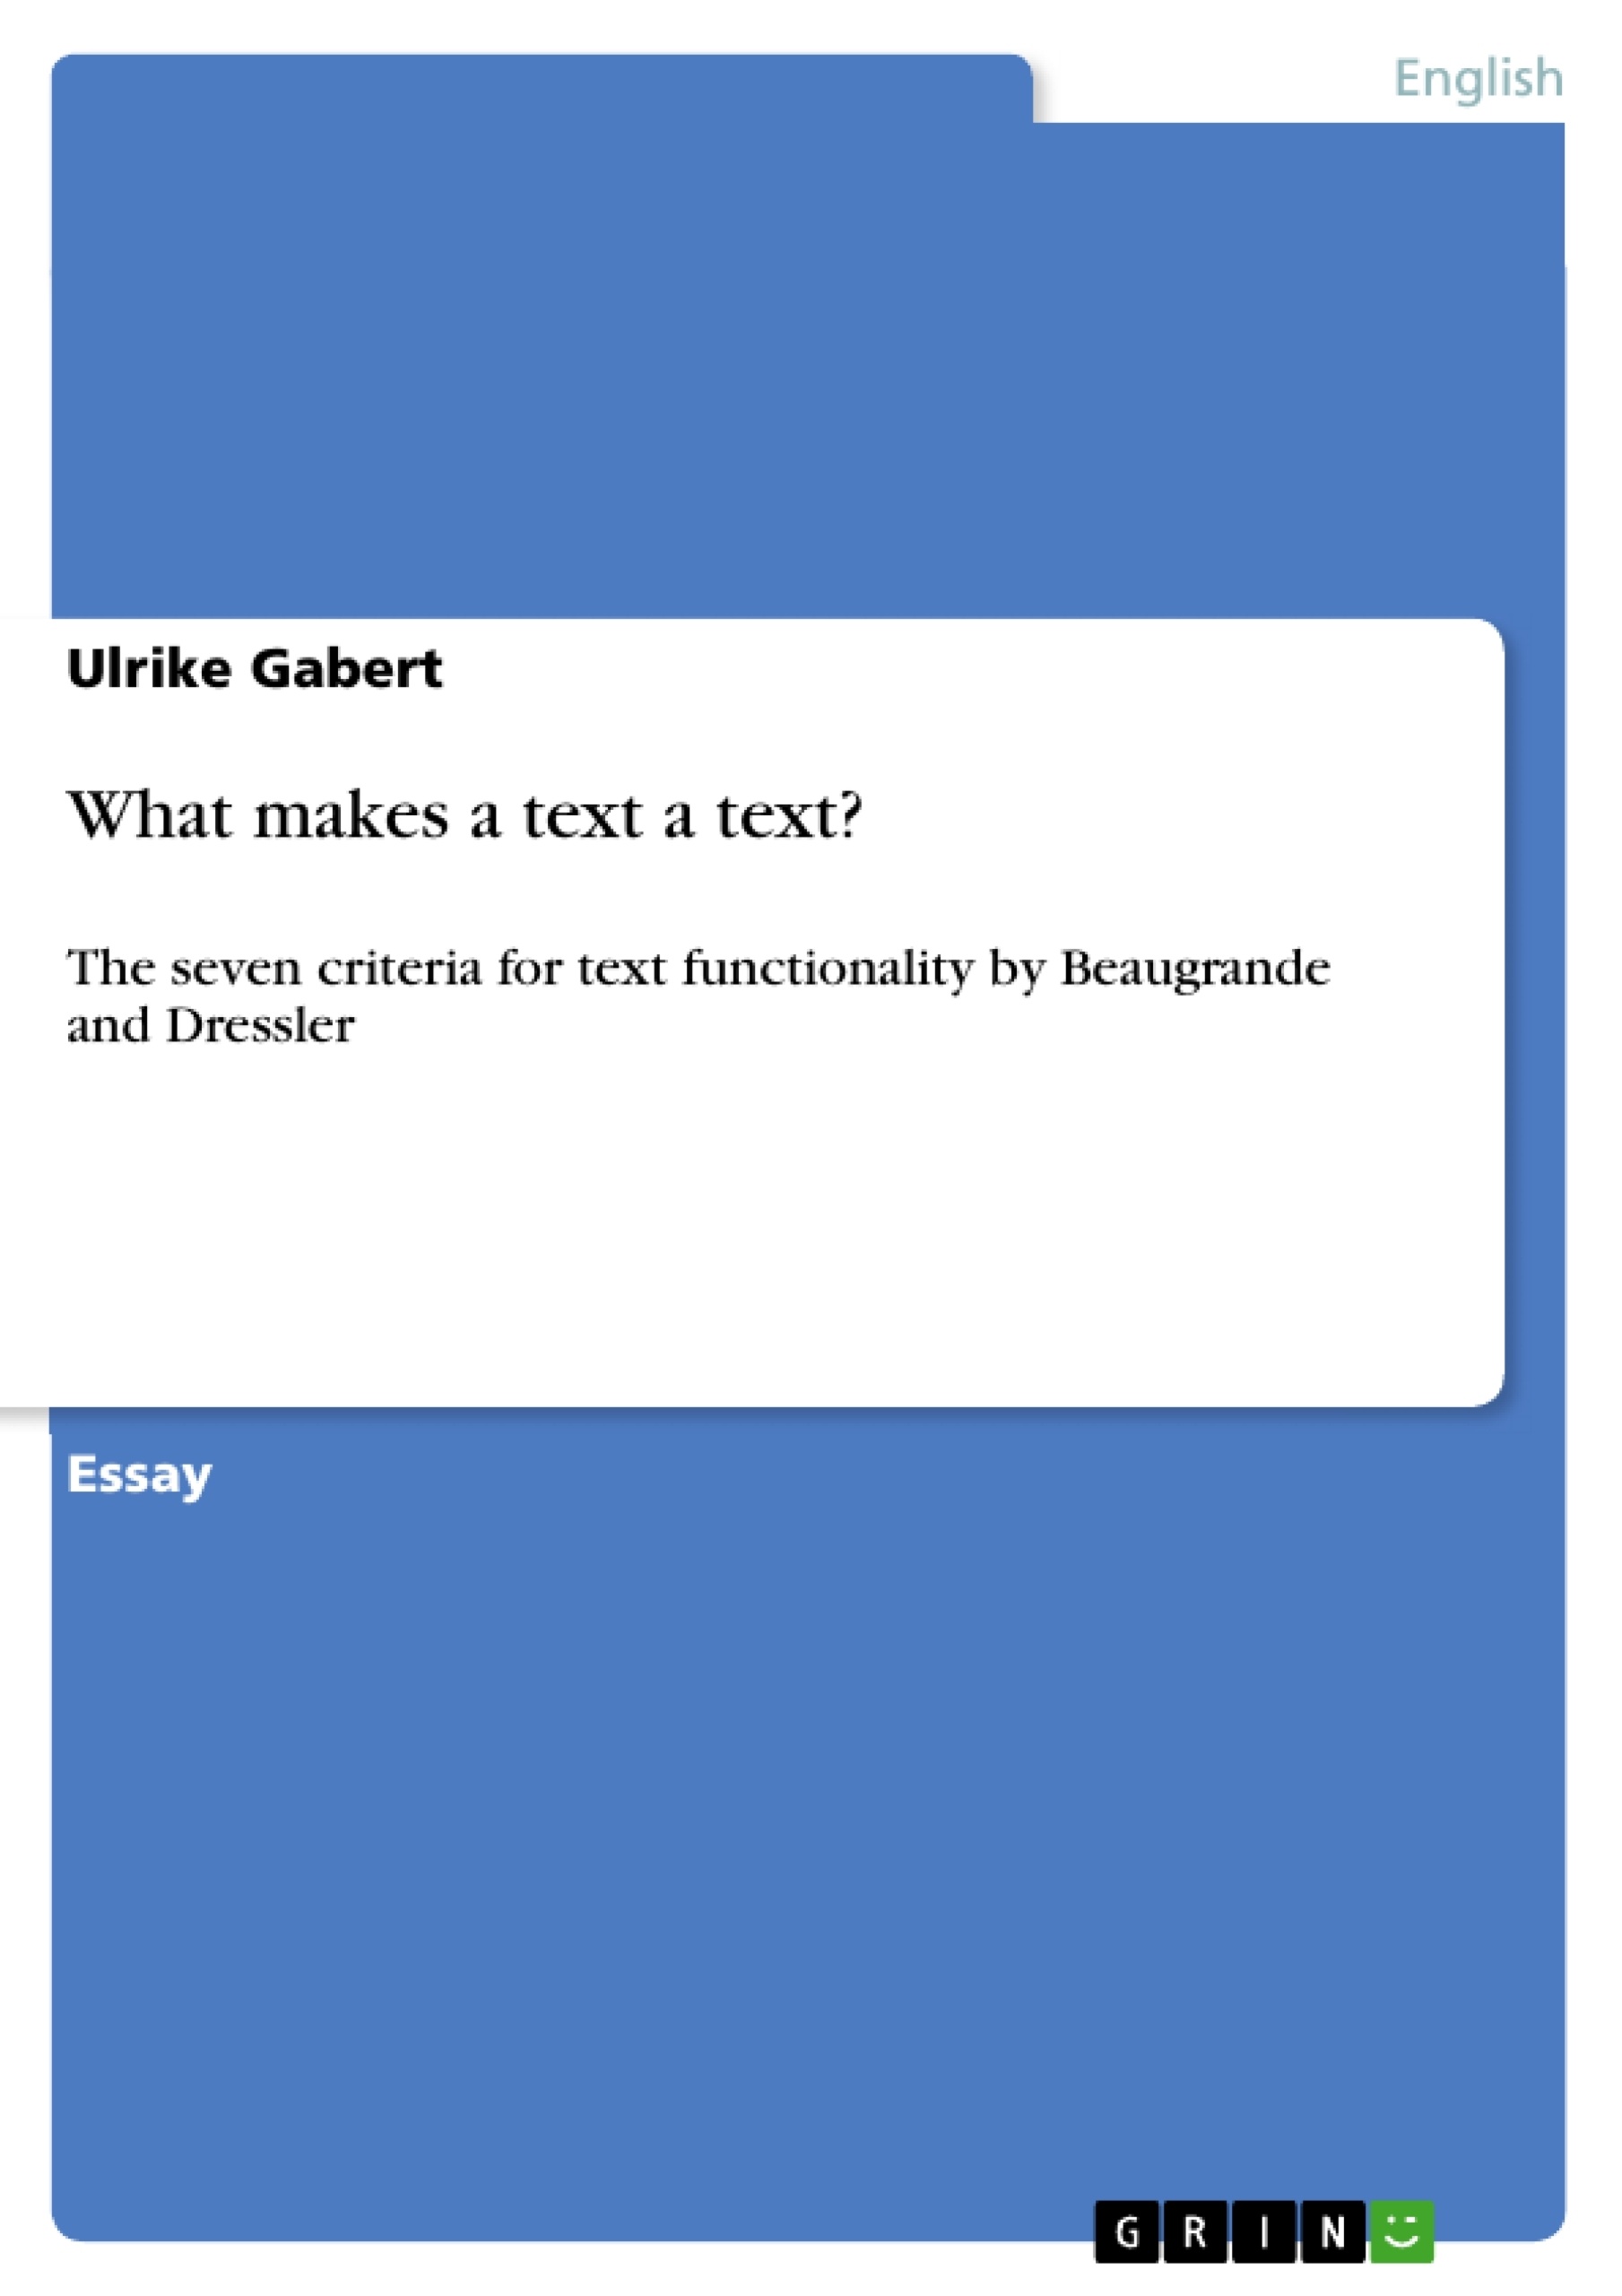 Title: What makes a text a text?